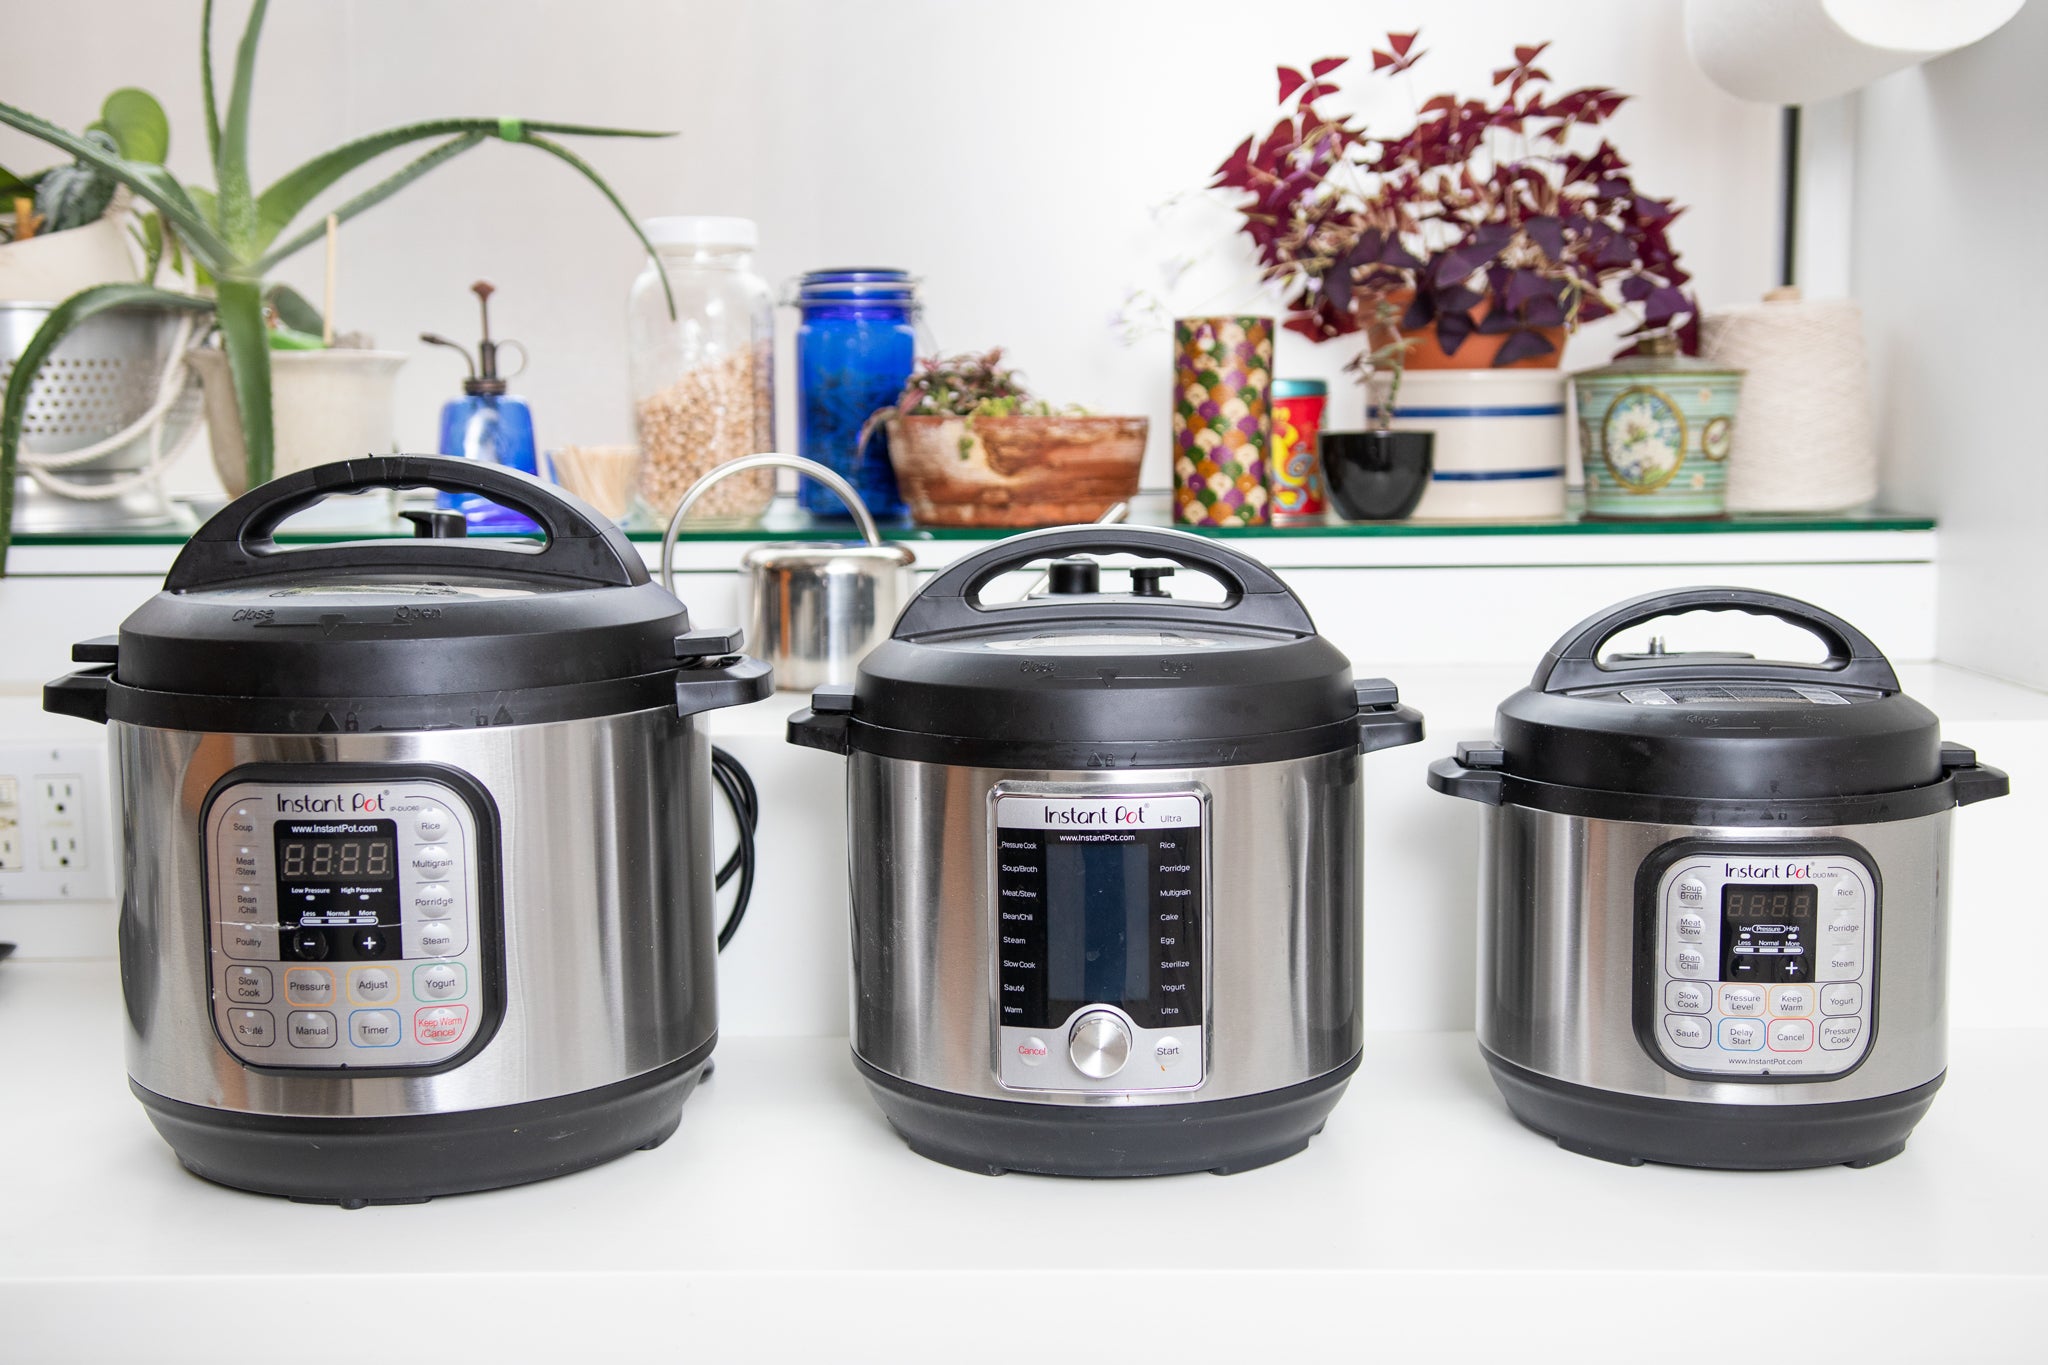 What Size Of Electric Pressure Cooker Do I Need